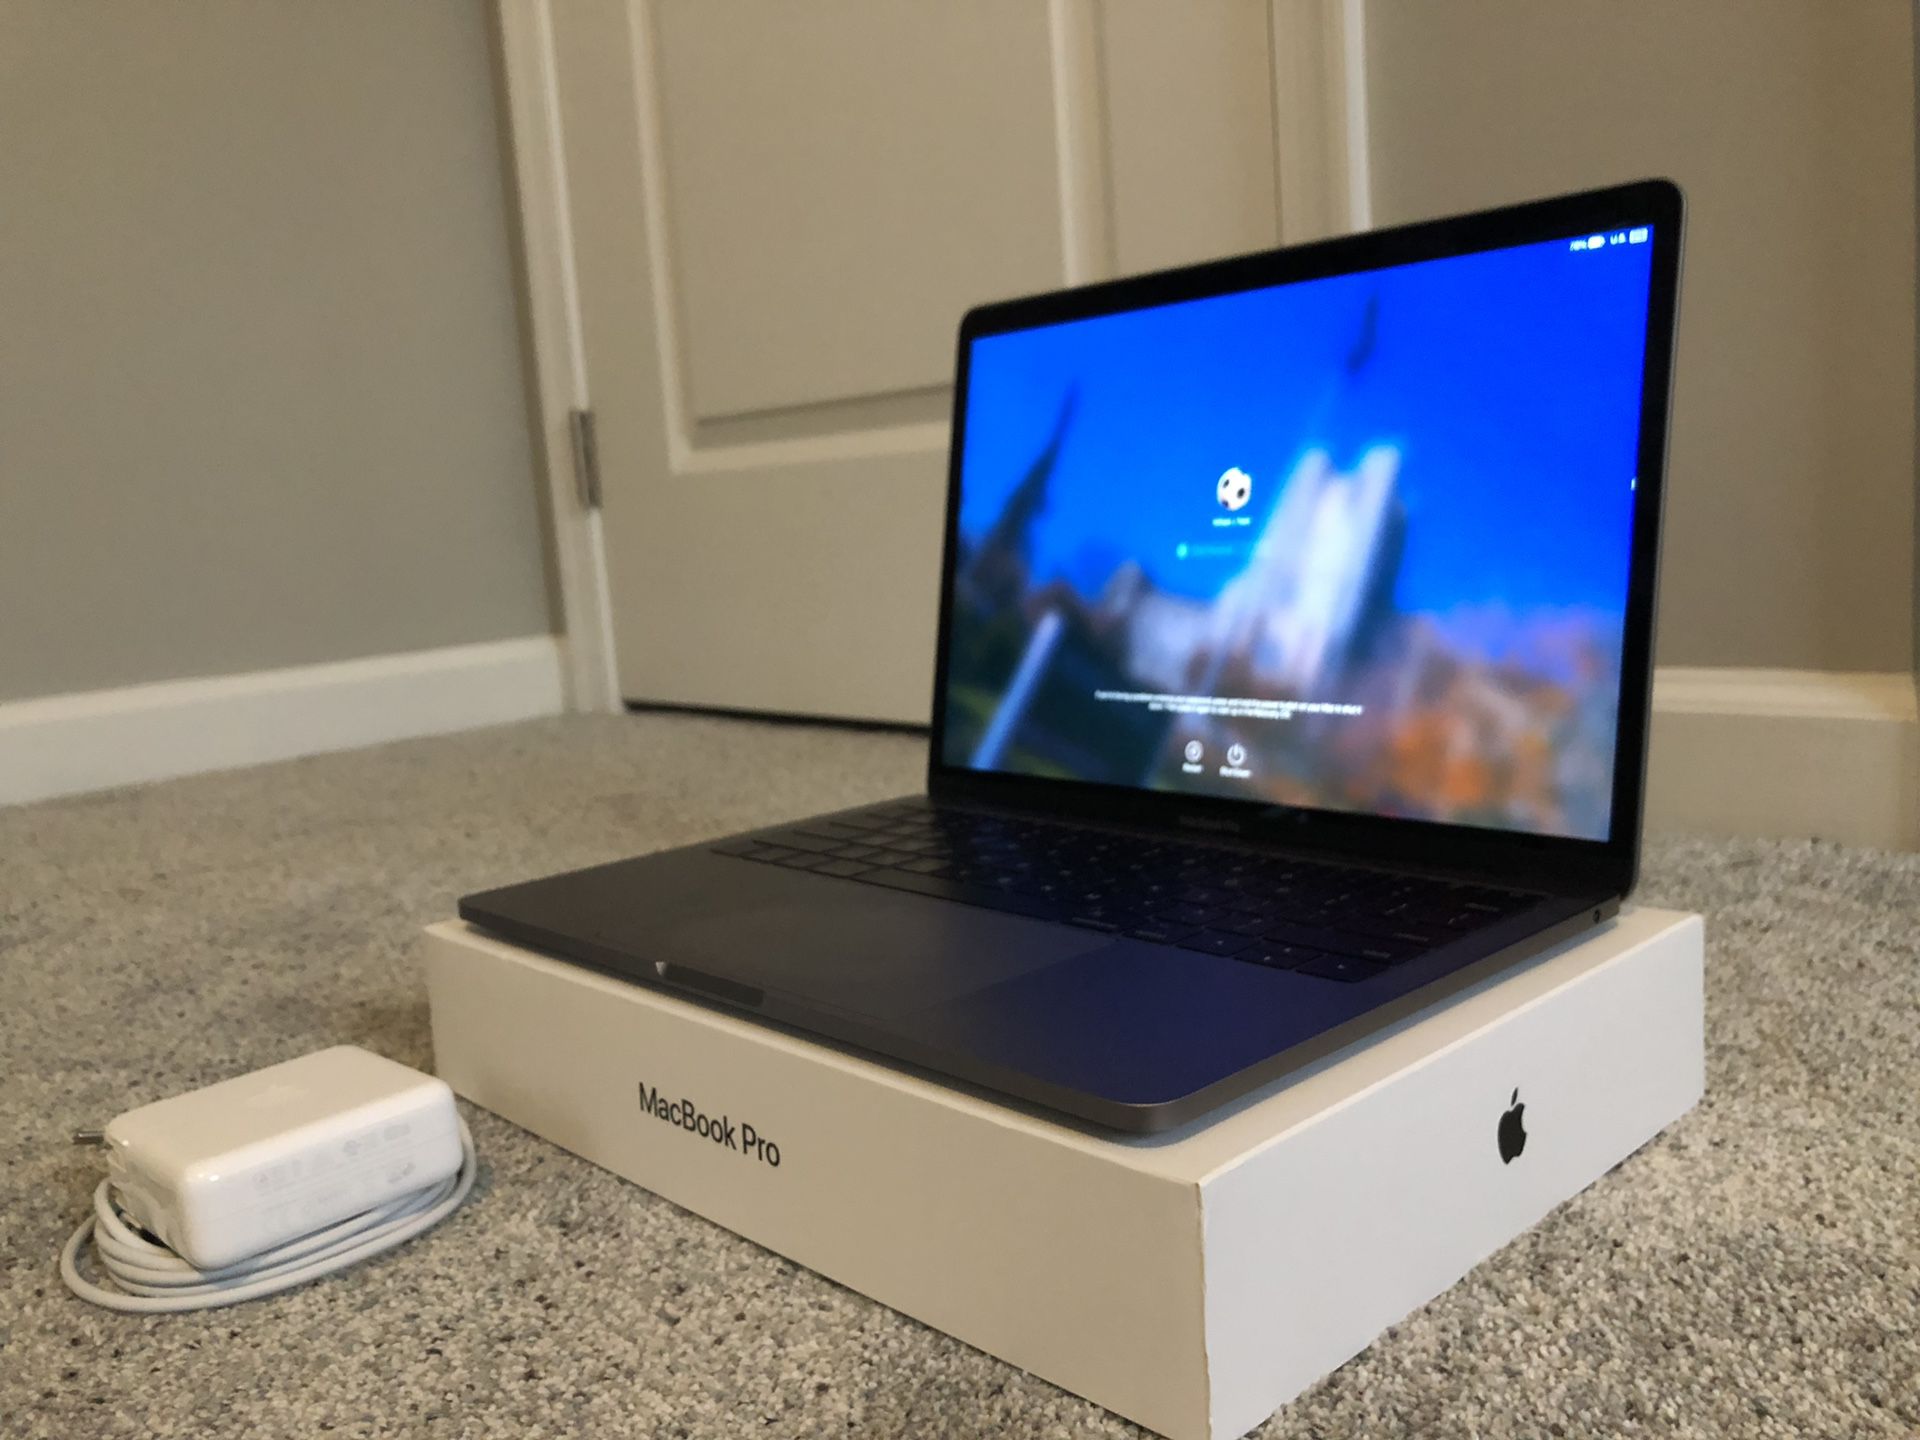 MacBook Pro (13.3”), AppleCare (1.5yrs) and charger in original box